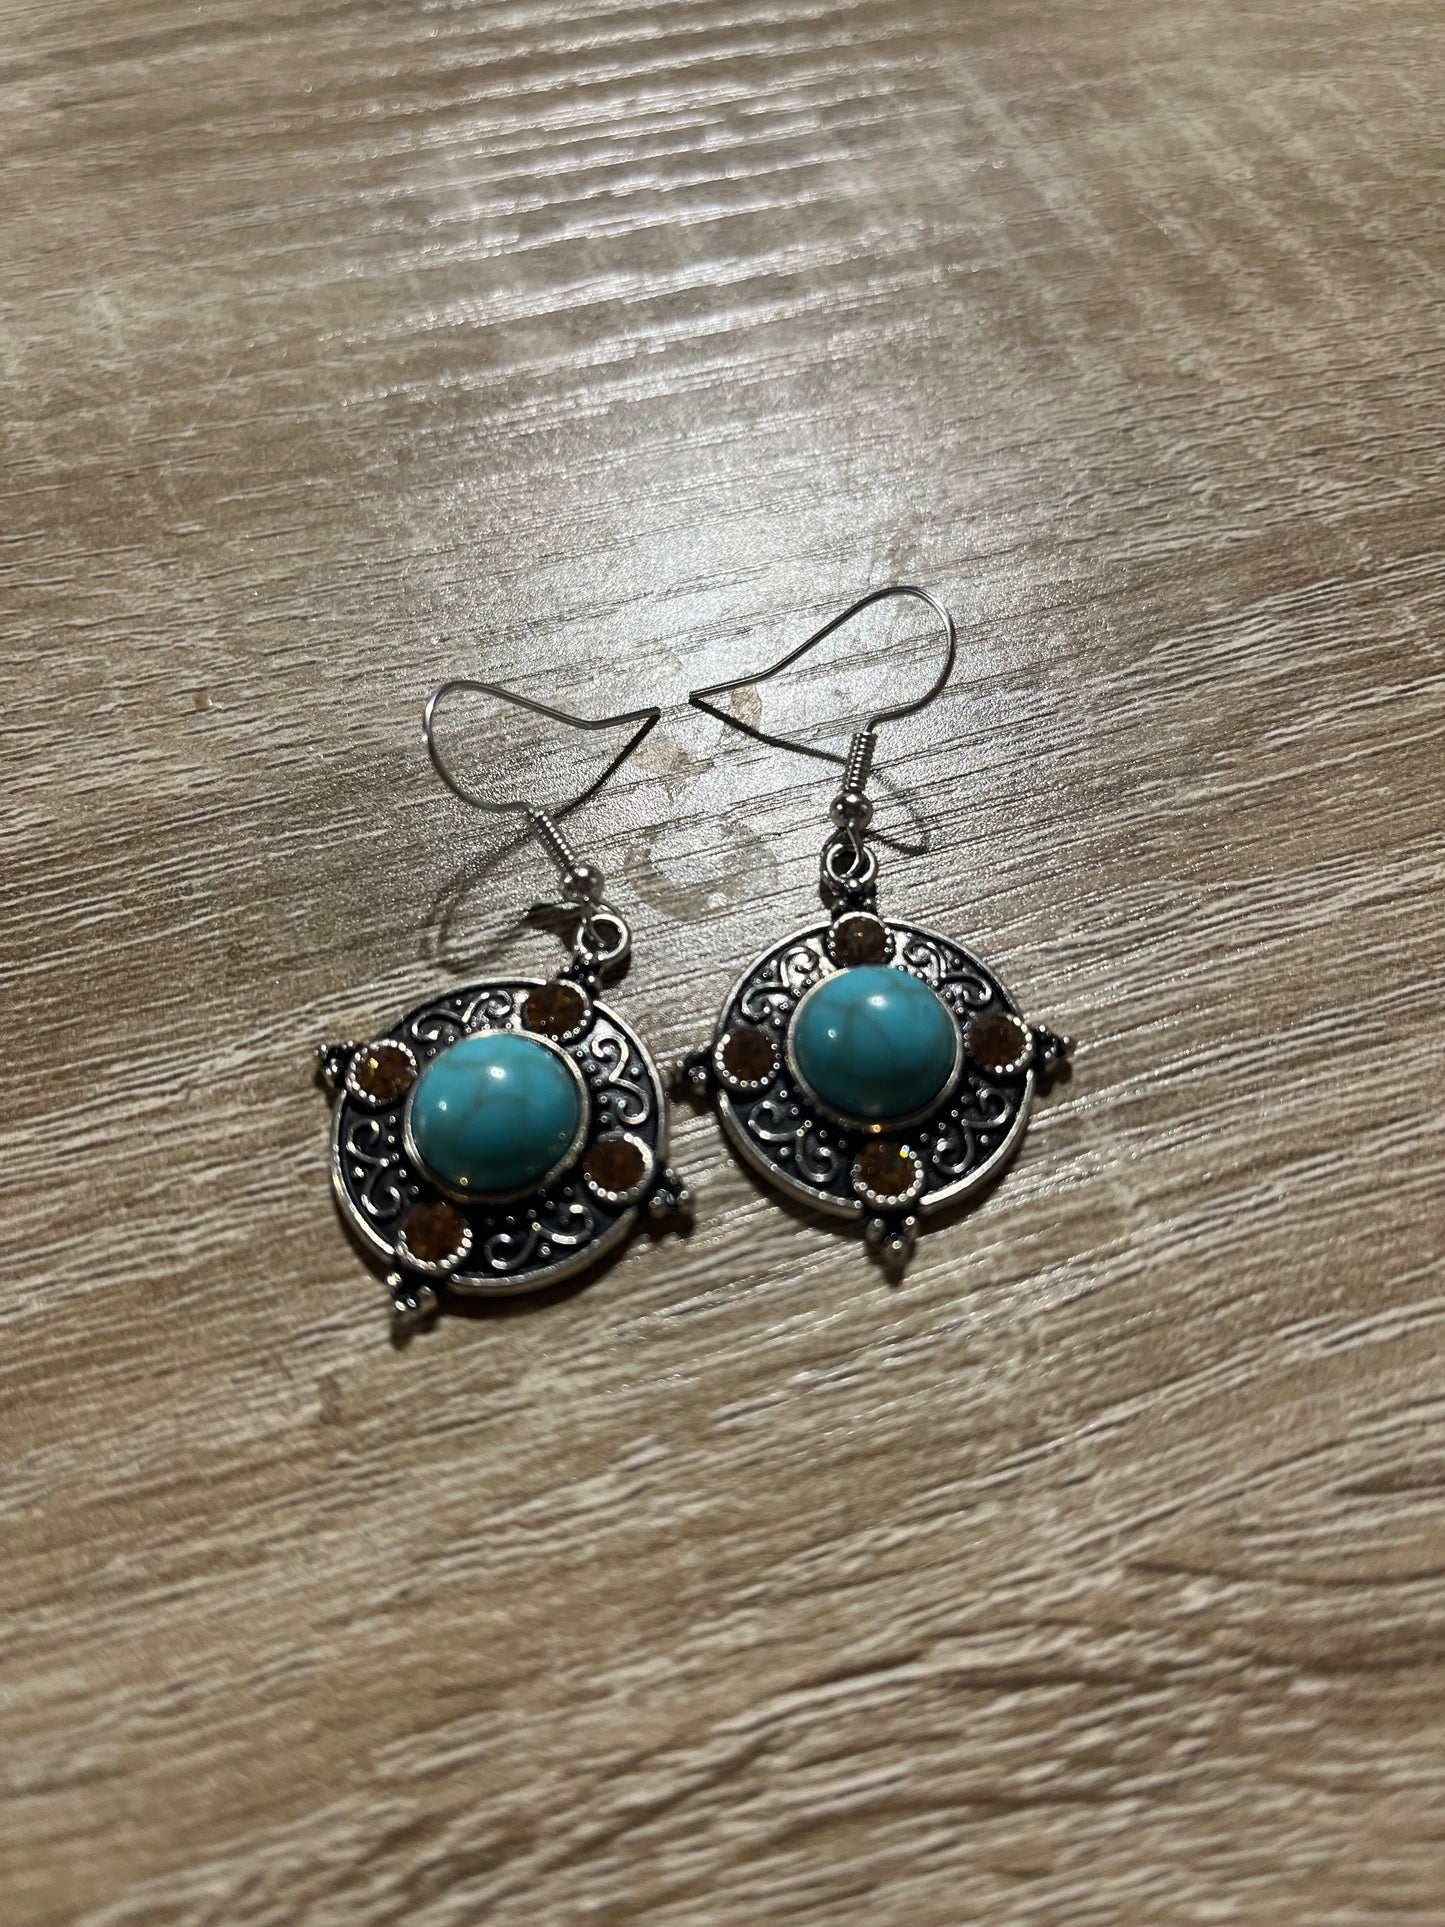 Round turquoise stone earrings